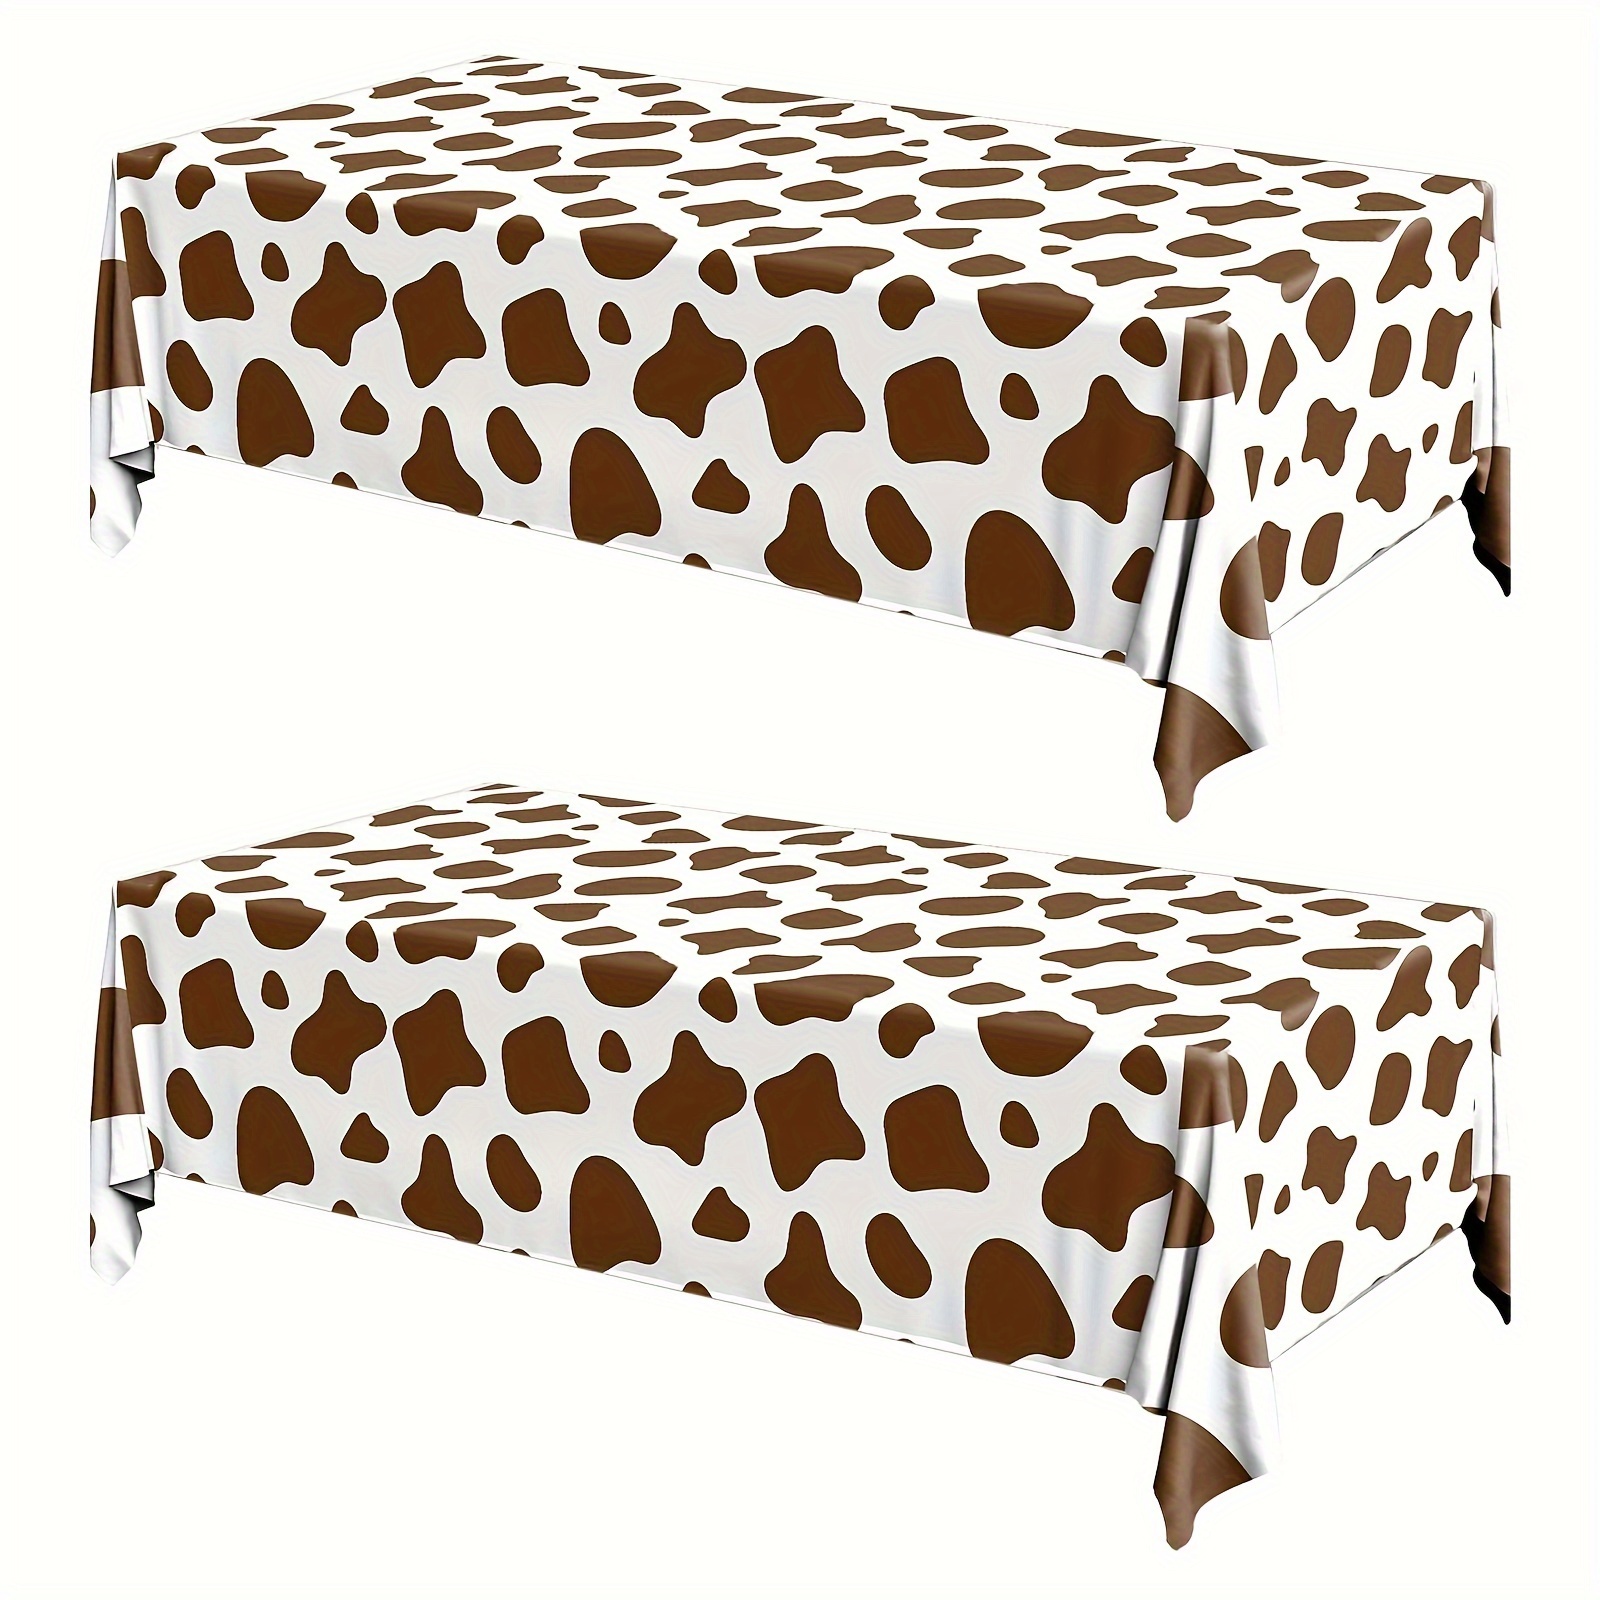 

2-piece Cow Print Disposable Tablecloths - Waterproof, Brown Plastic Rectangular Covers For Farm Animal & Western Cowboy Themed Parties, Birthday Supplies (108x54 Inches)